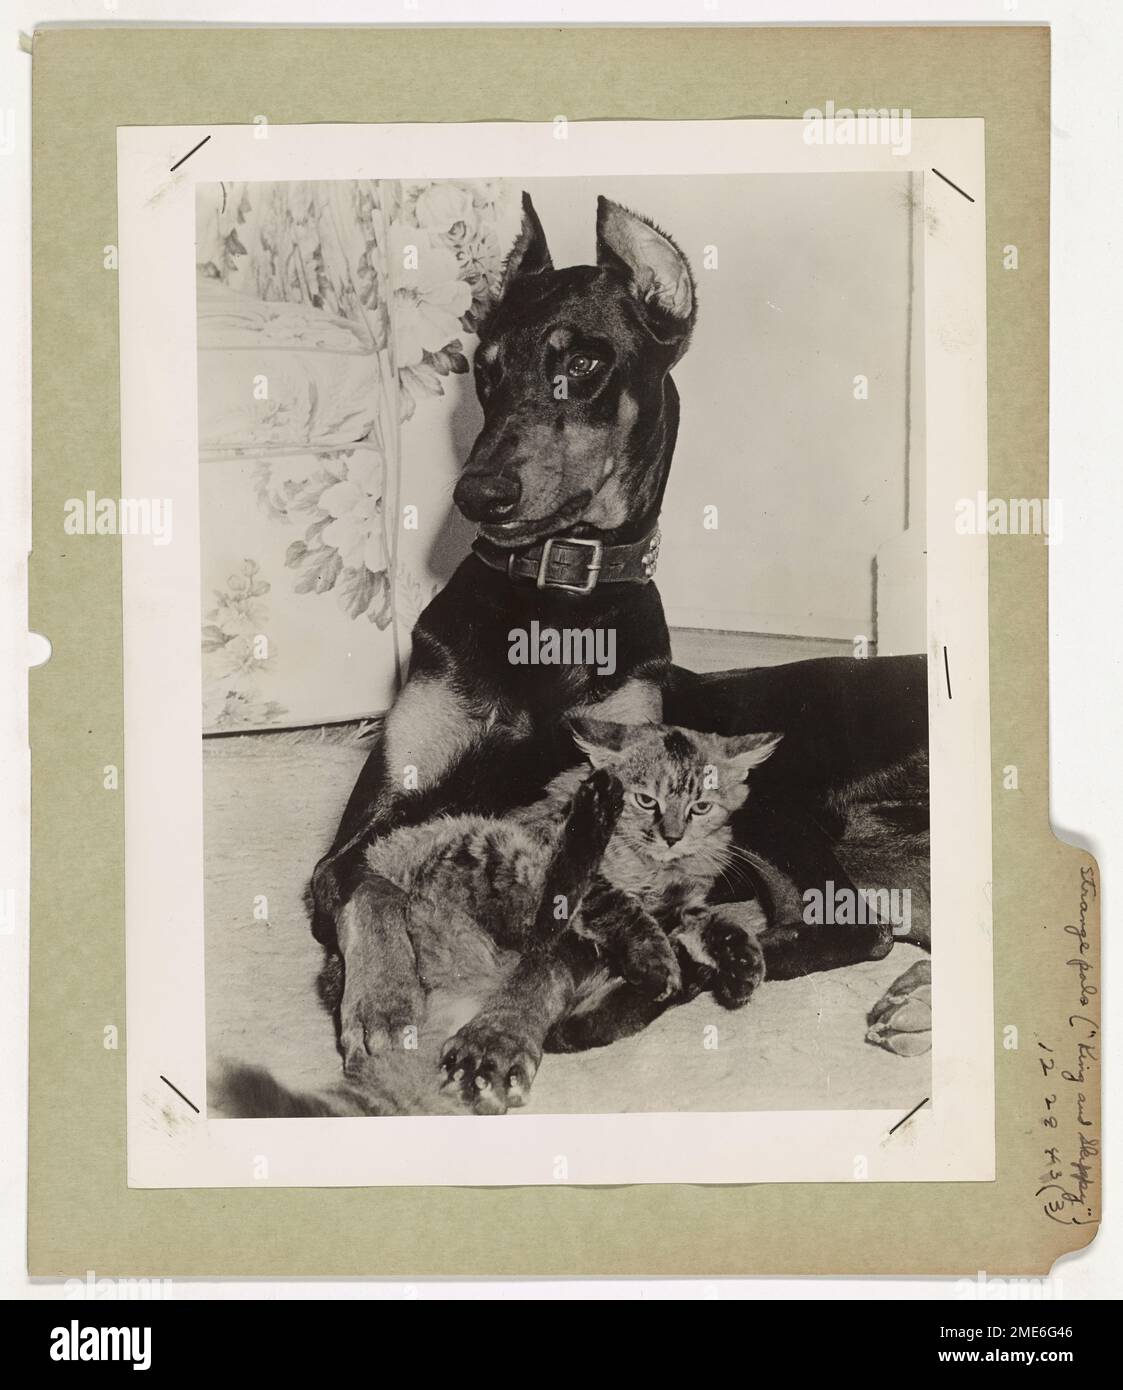 Strange Pals Parted by War. A strange friendship was interrupted by the war when one of the friends 'enlisted' in the U.S. Coast Guard. King, a 100 pound Doberman Pinscher, and Skippy, a 12 pound cat, both owned by Mr. and Mrs. R. M. Dusenbury of 163 S.W. 28th Road, Miami, Florida, became good friends when they were first brought together last summer, engaging in playful antics much of the time. King is now patrolling the lonely outposts on guard against enemy saboteurs while Skippy remains home. Stock Photo